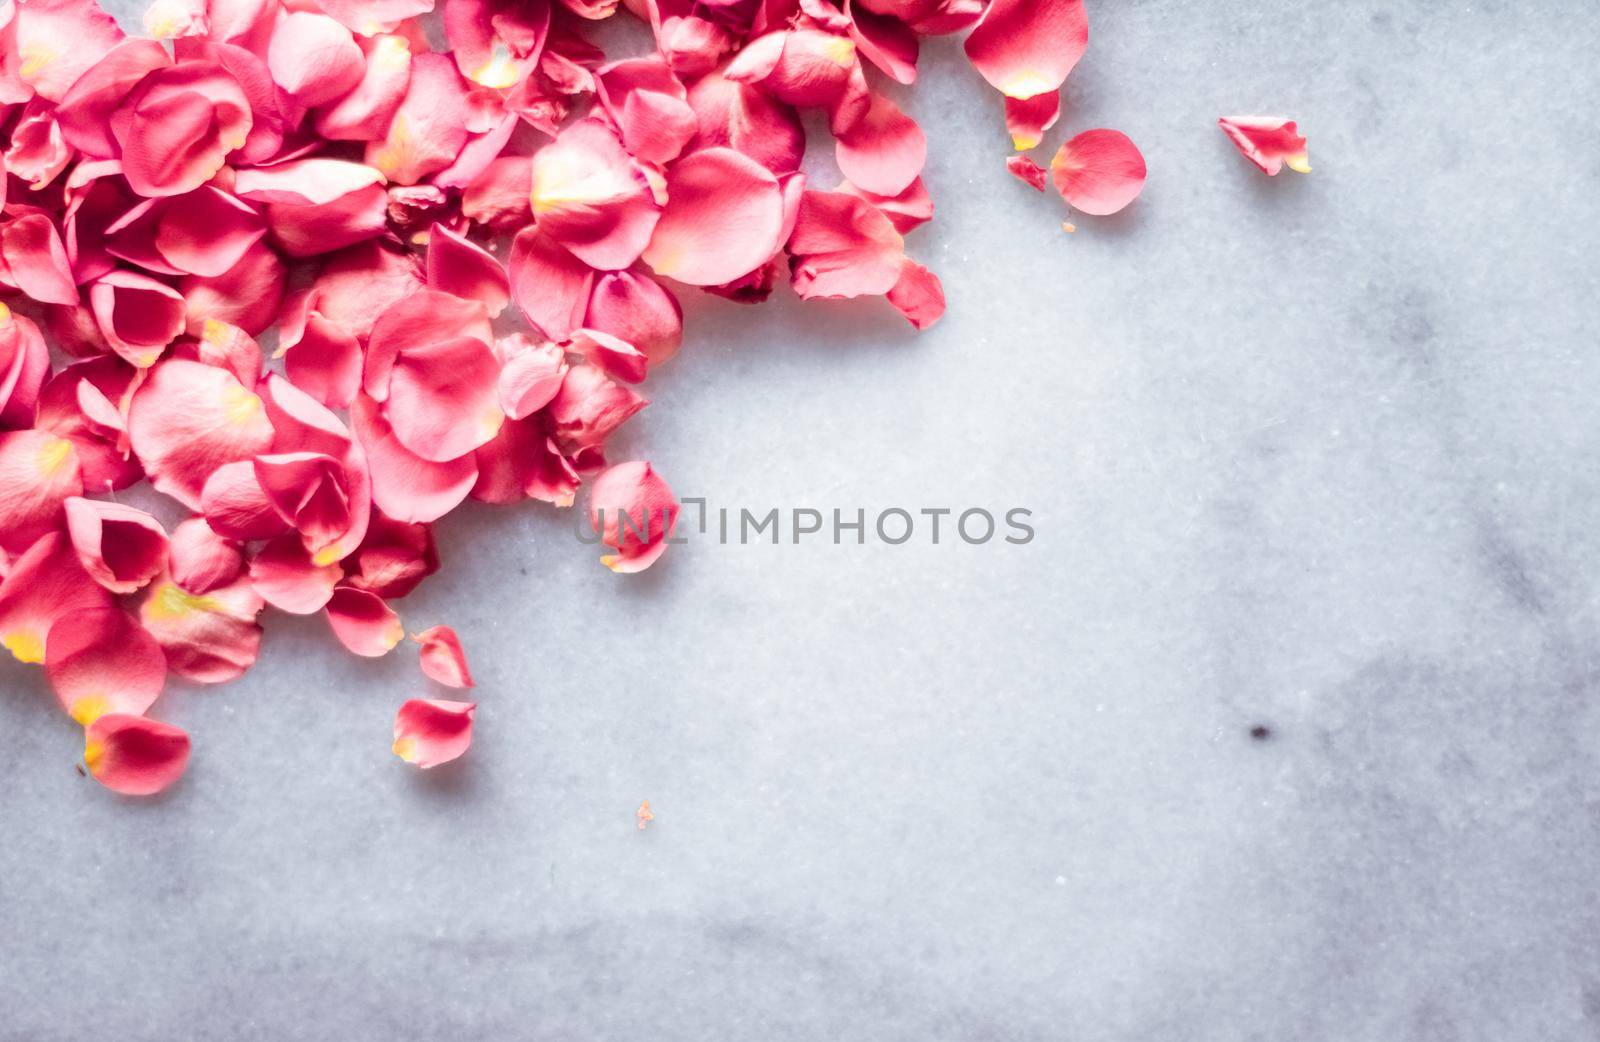 Art of flowers, wedding invitation and nature beauty concept - Rose petals on marble stone, floral background